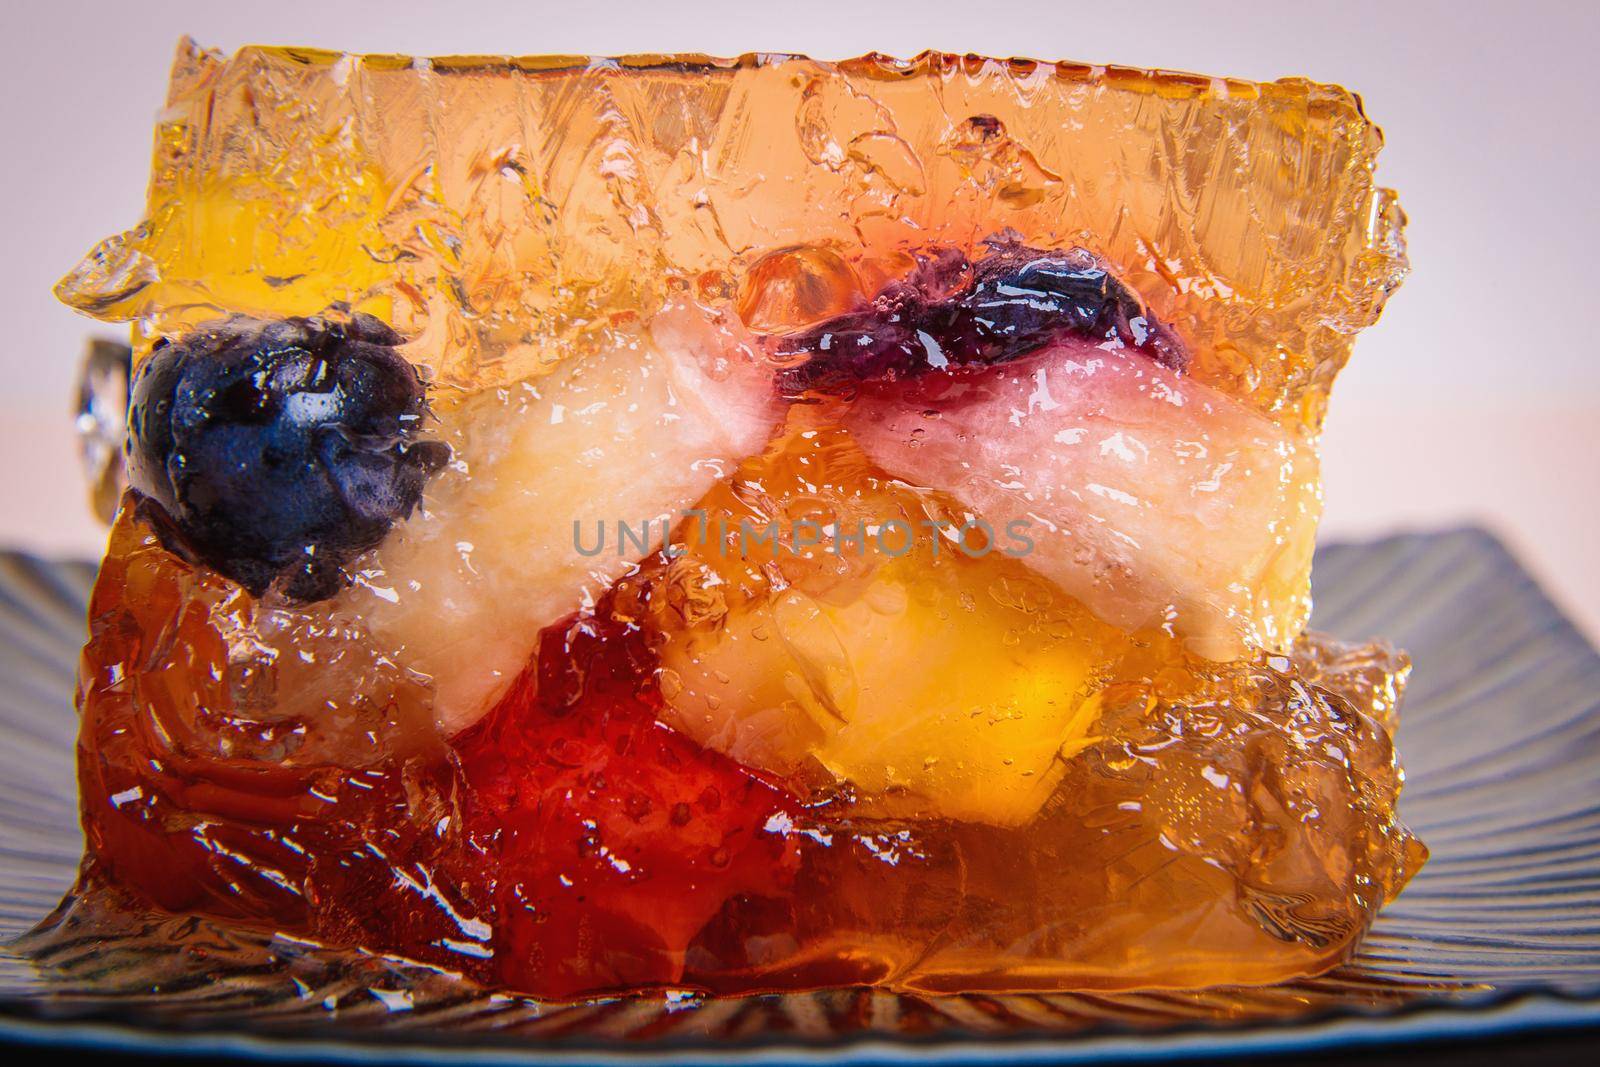 Jelly from different fruits and berries on a square saucer. Dessert. by Yurich32